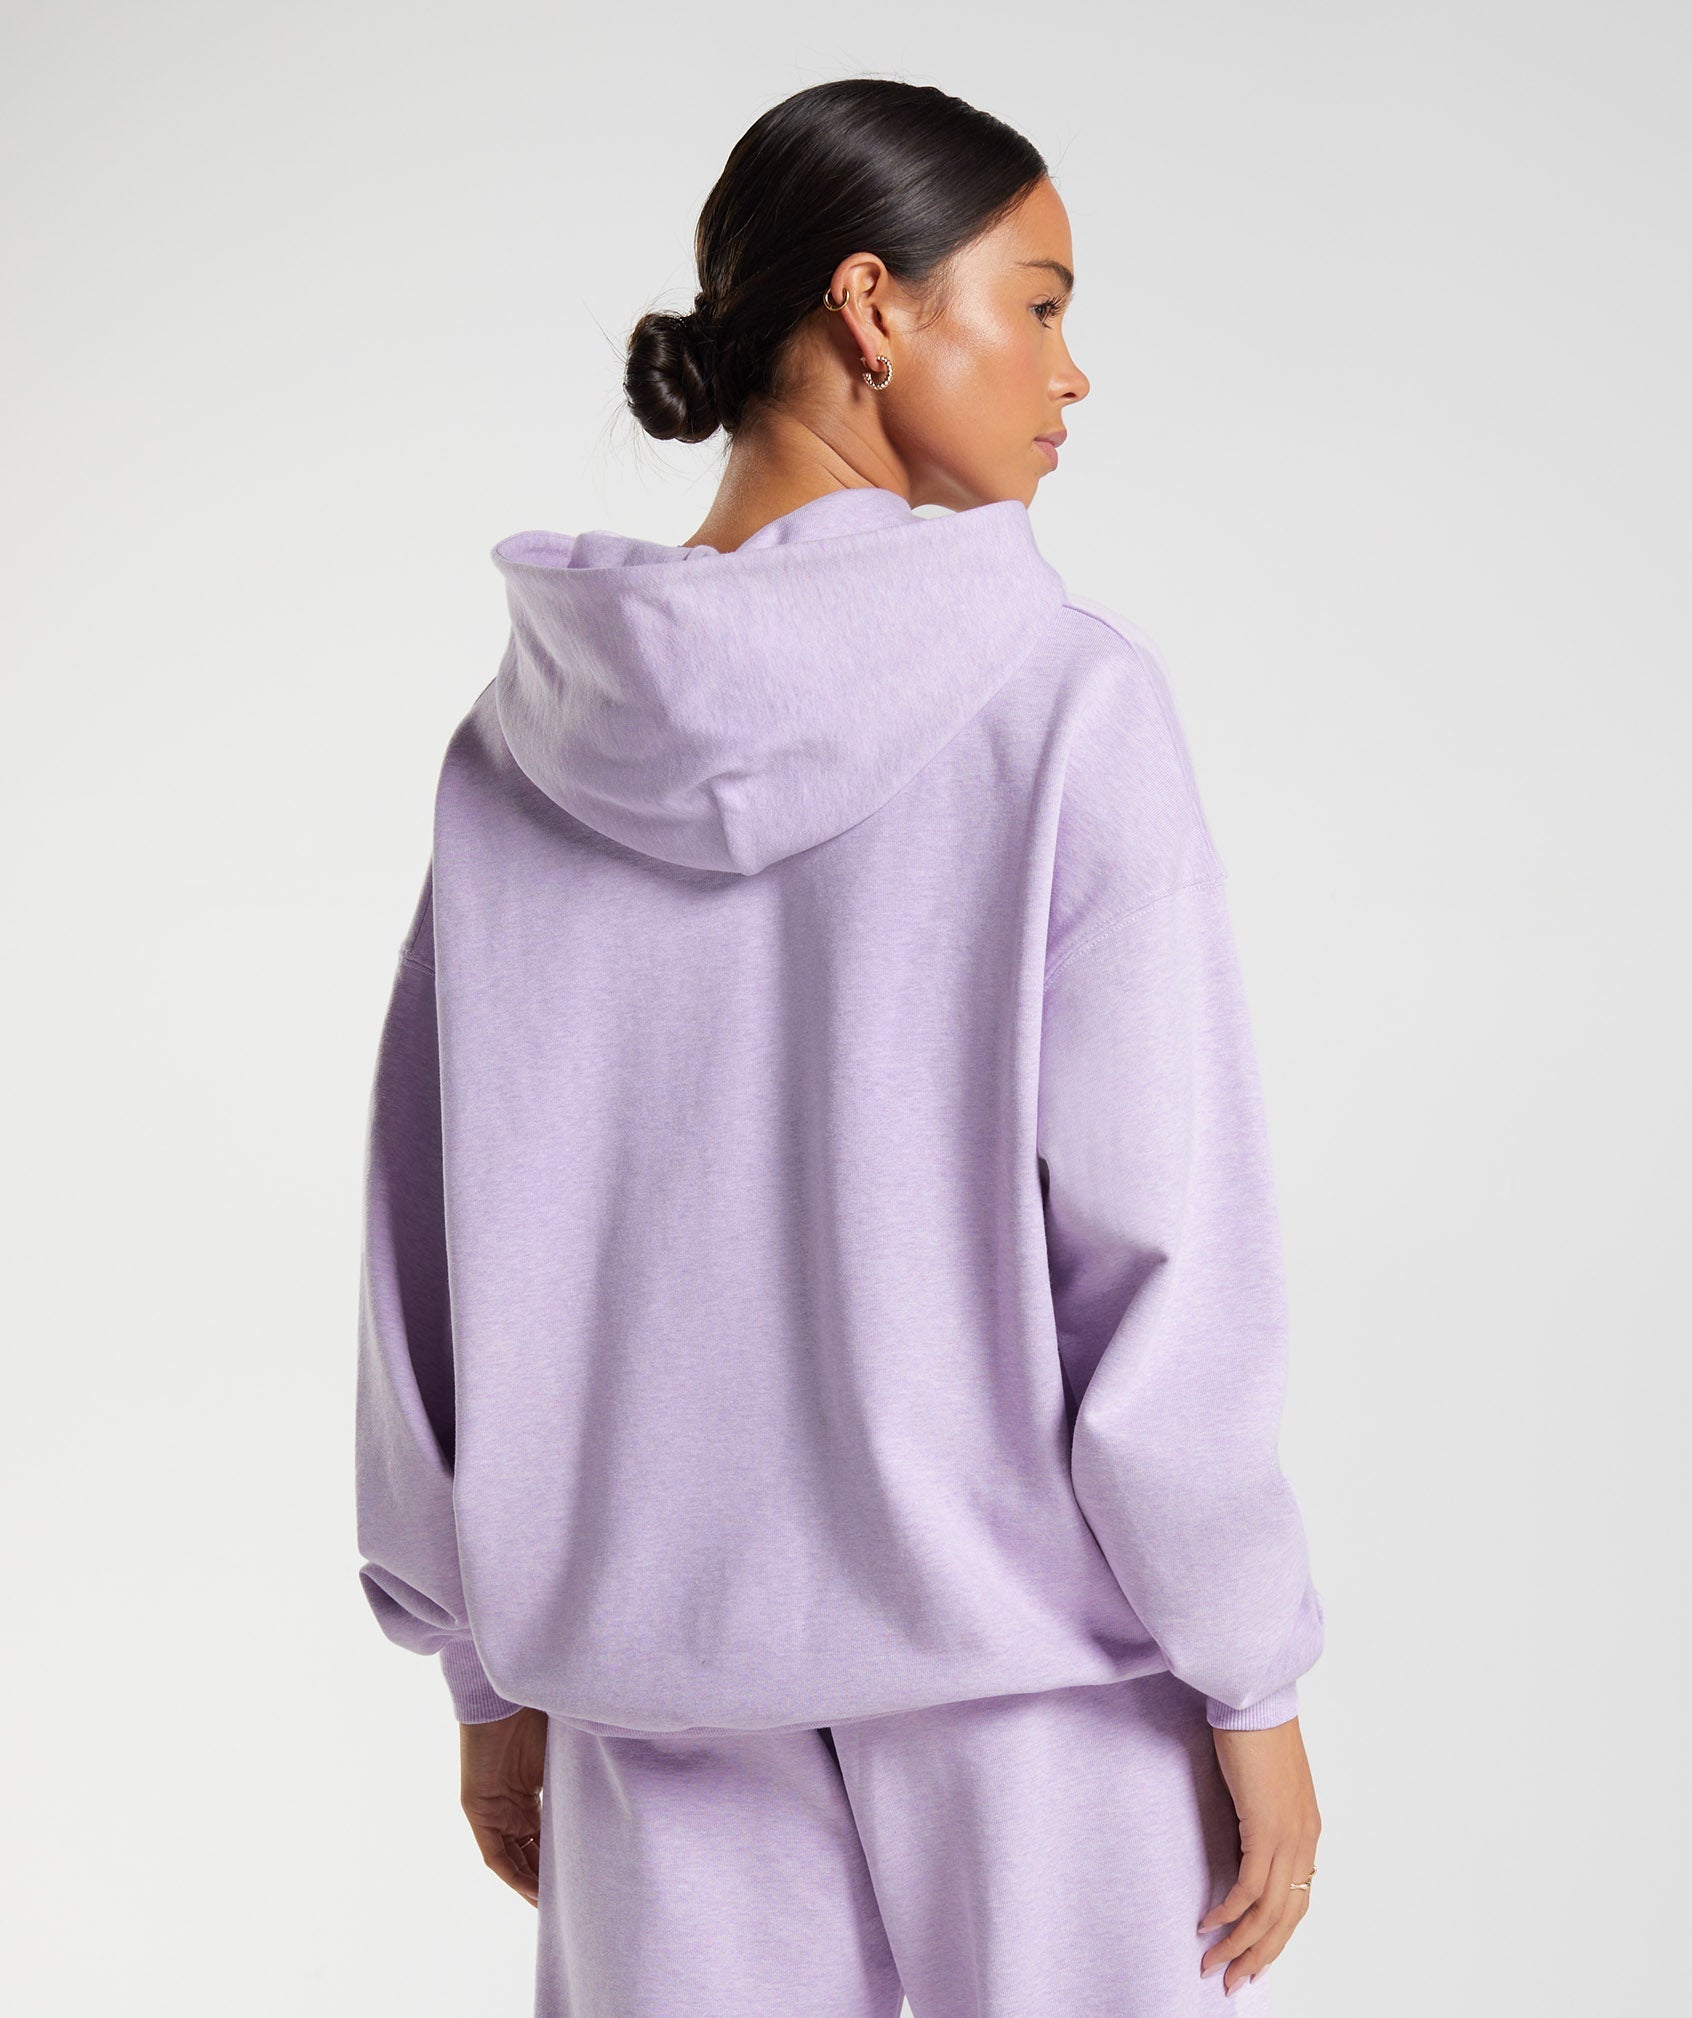 Rest Day Sweats Hoodie in Aura Lilac Marl - view 3